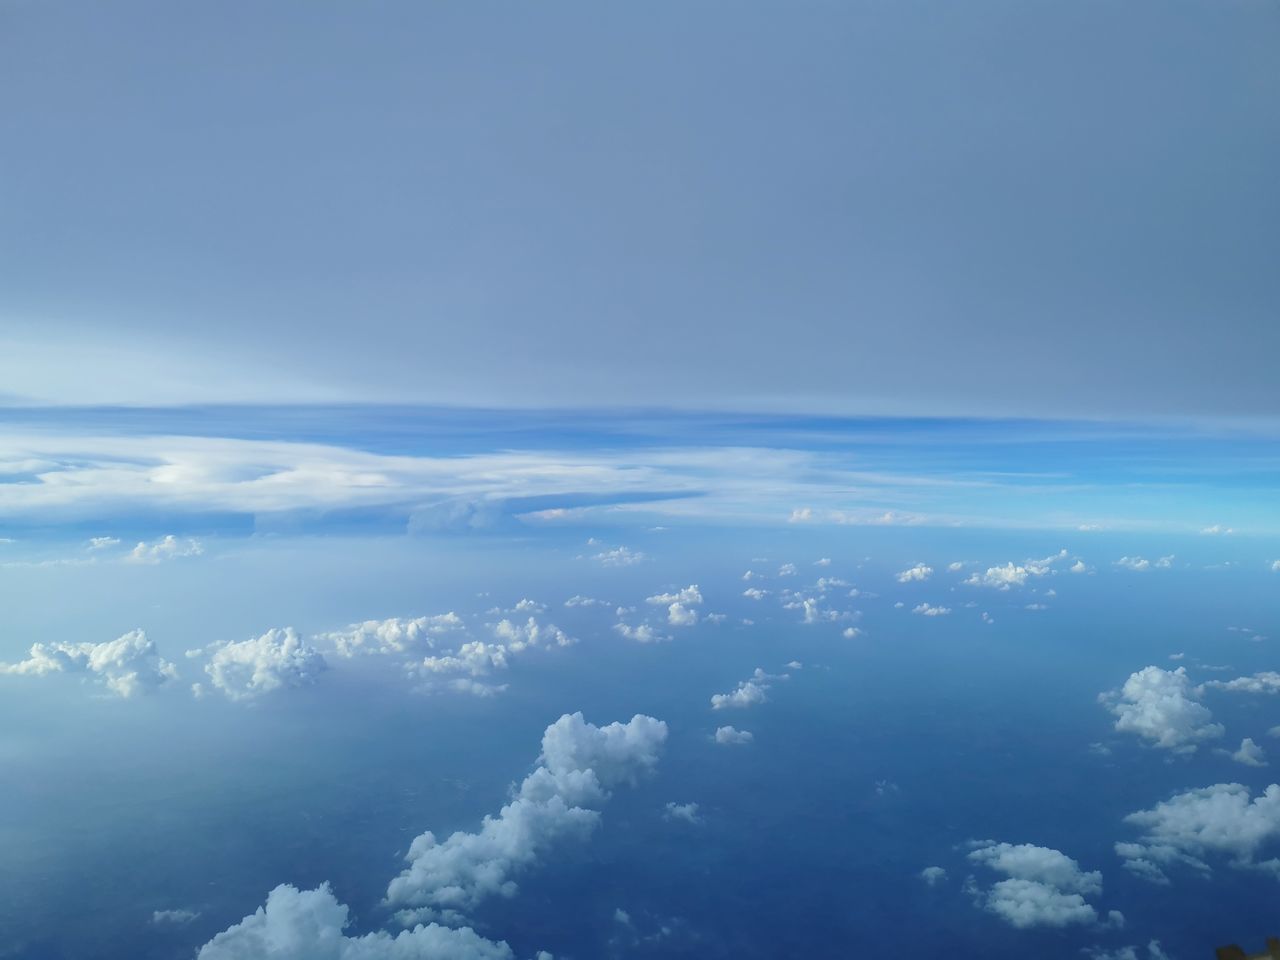 sky, cloud, horizon, aerial view, blue, nature, environment, cloudscape, scenics - nature, beauty in nature, atmosphere, copy space, no people, airplane, high up, tranquility, idyllic, outdoors, travel, plain, landscape, air vehicle, flying, day, backgrounds, tranquil scene, overcast, above, space, high angle view, white, urban skyline, wind, clear sky, water, fluffy, sunlight, planet earth, transportation